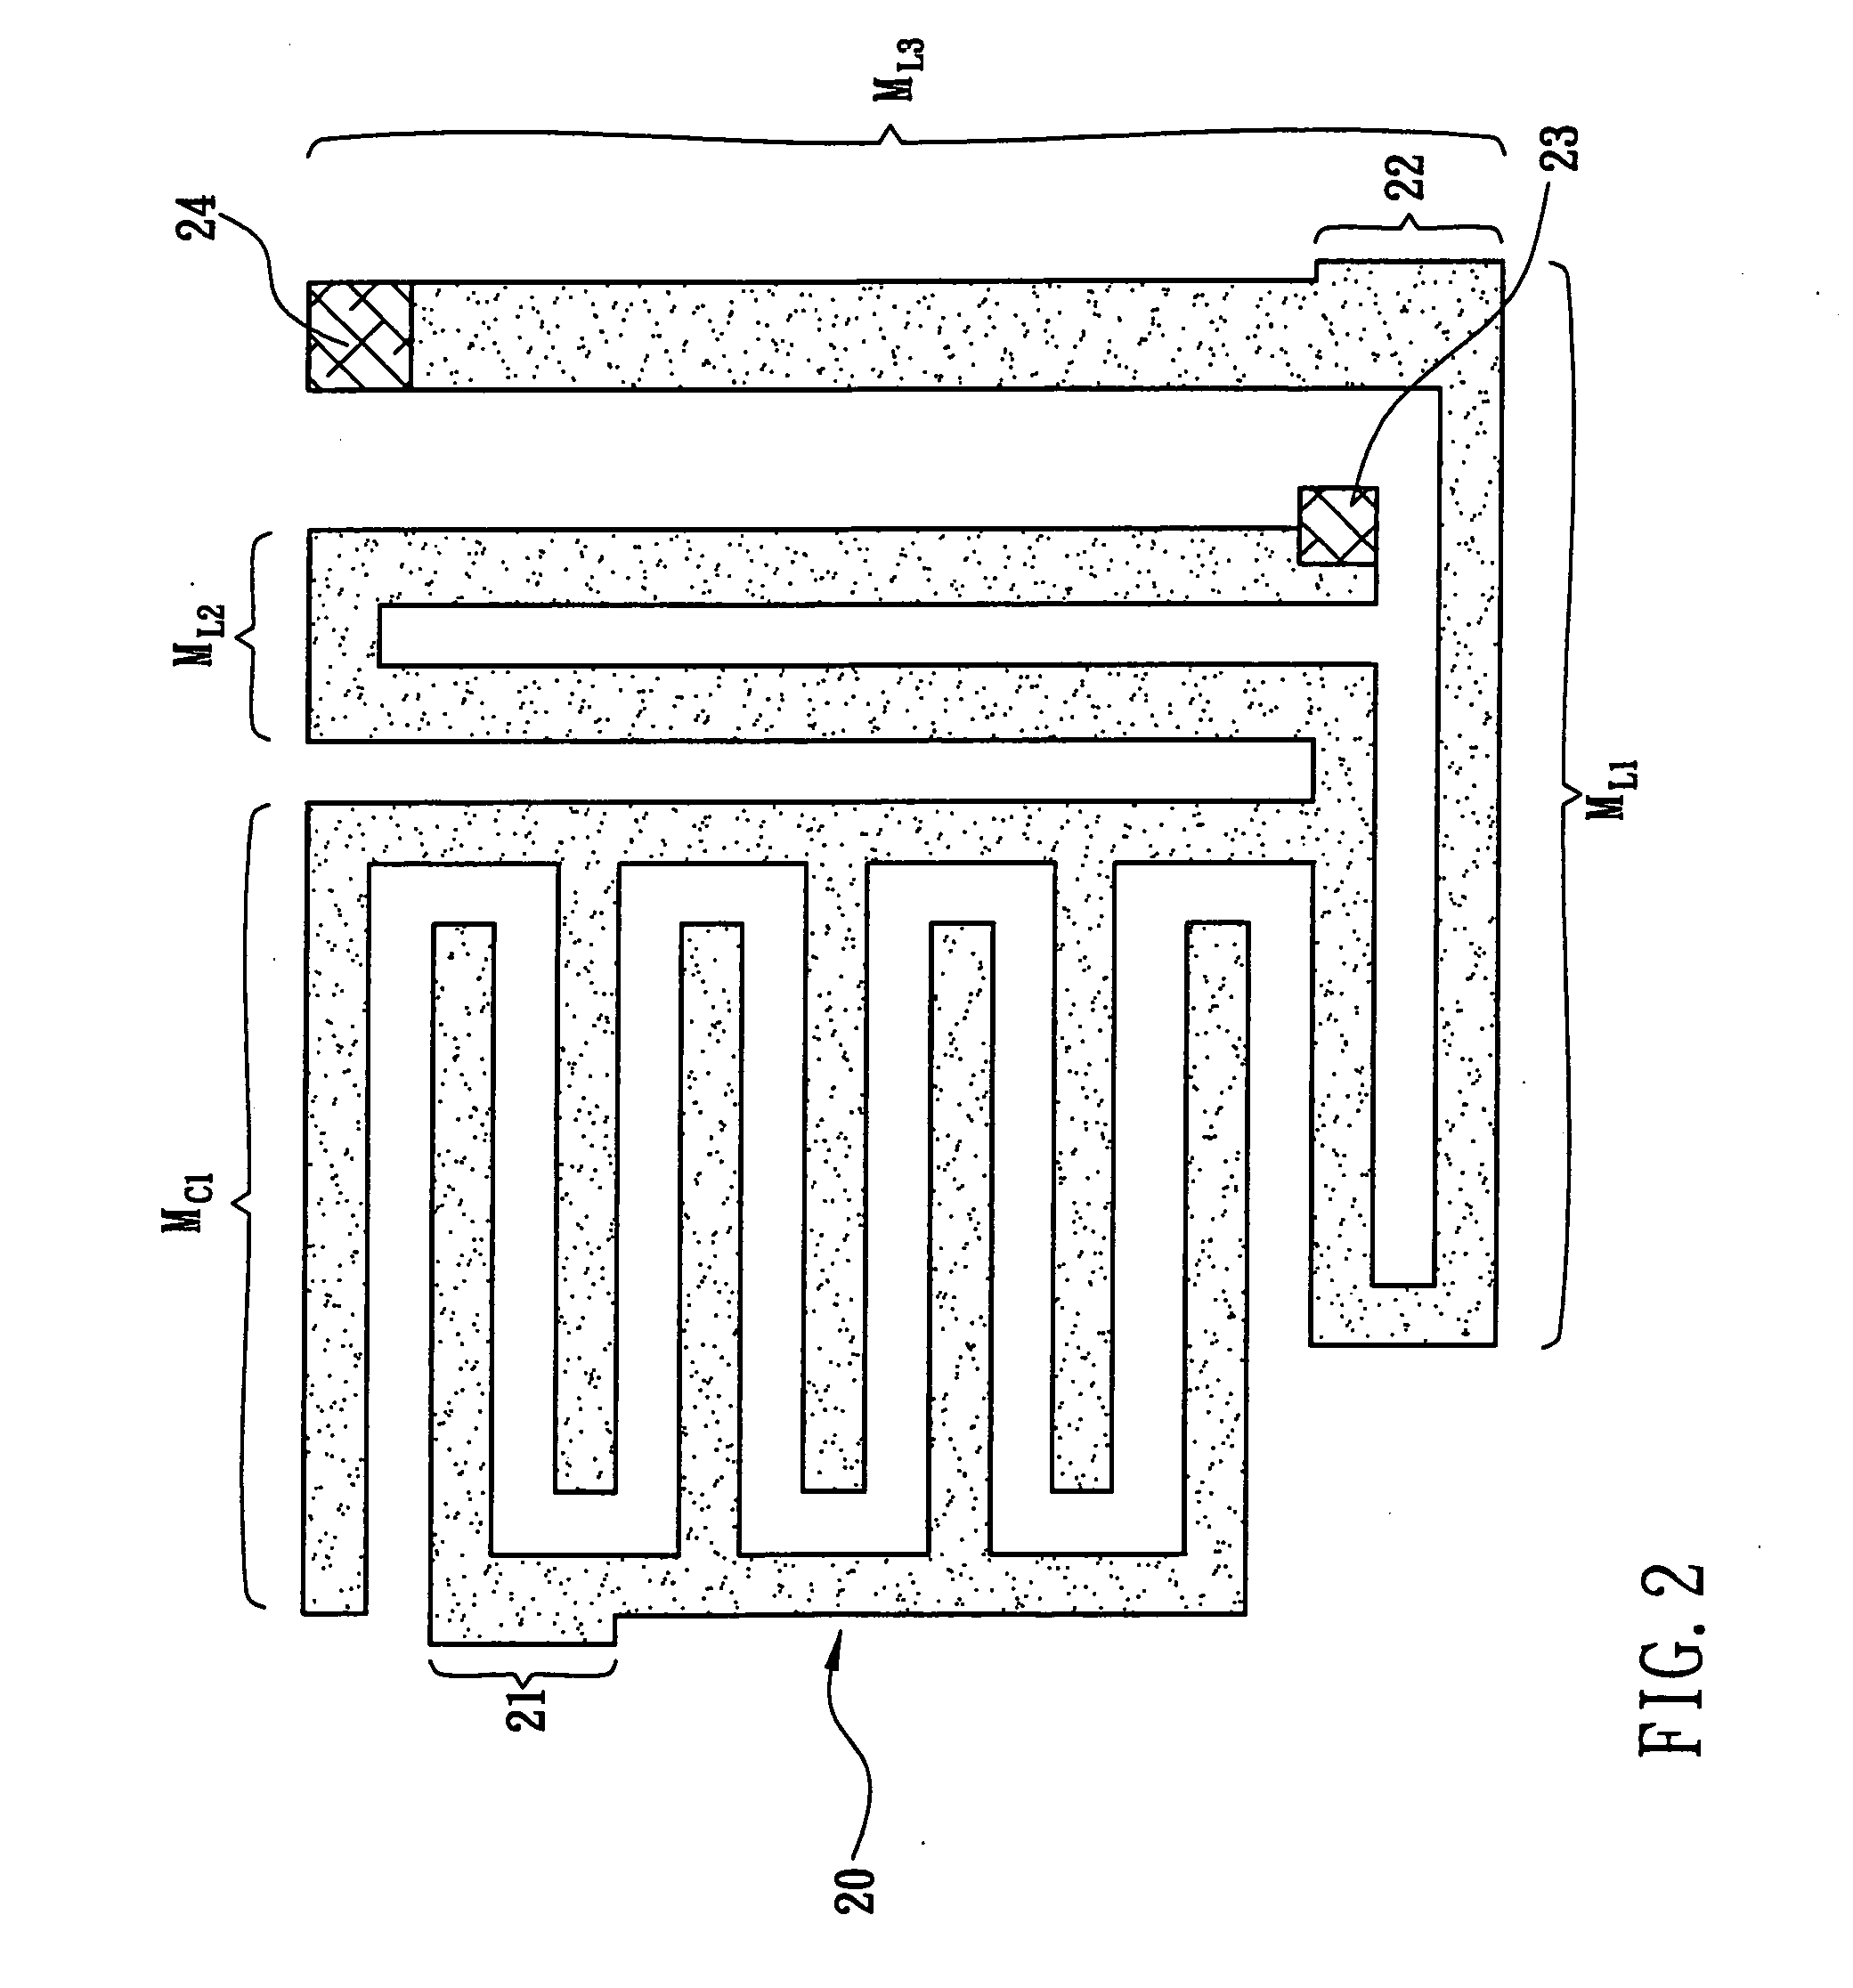 Narrow bandpass filter installed on a circuit board for suppressing a high-frequency harmonic wave